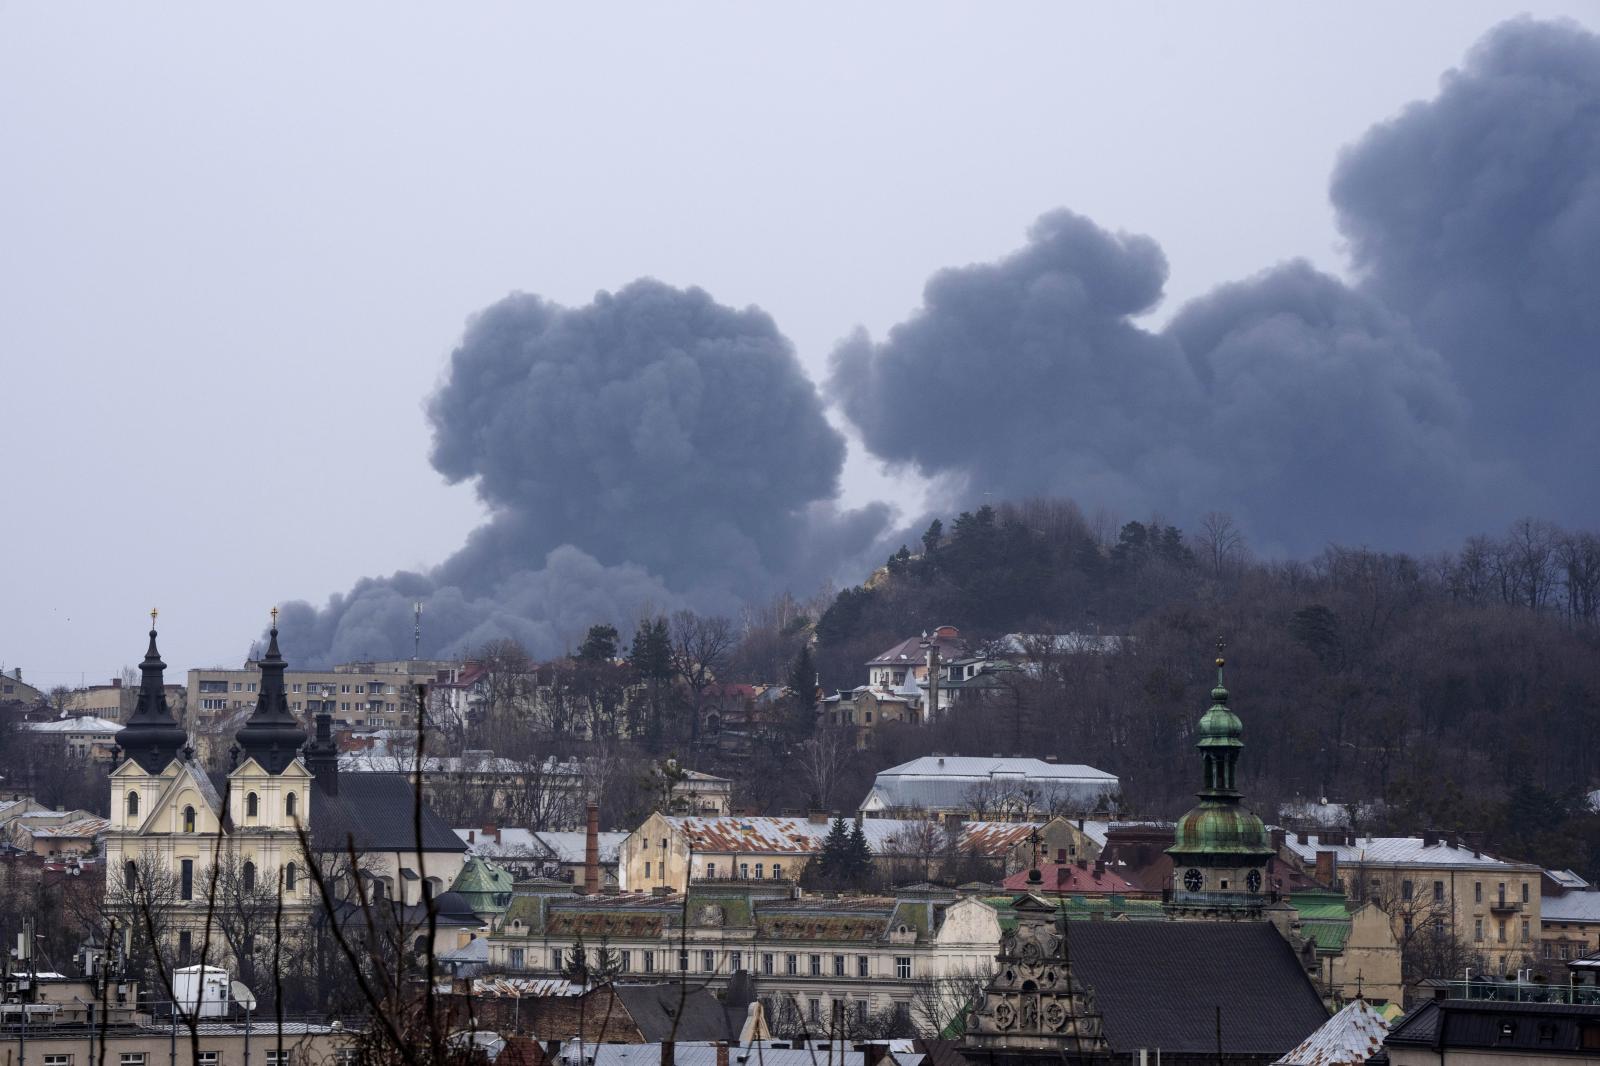  Russian rockets struck the wes...en visited neighboring Poland. 